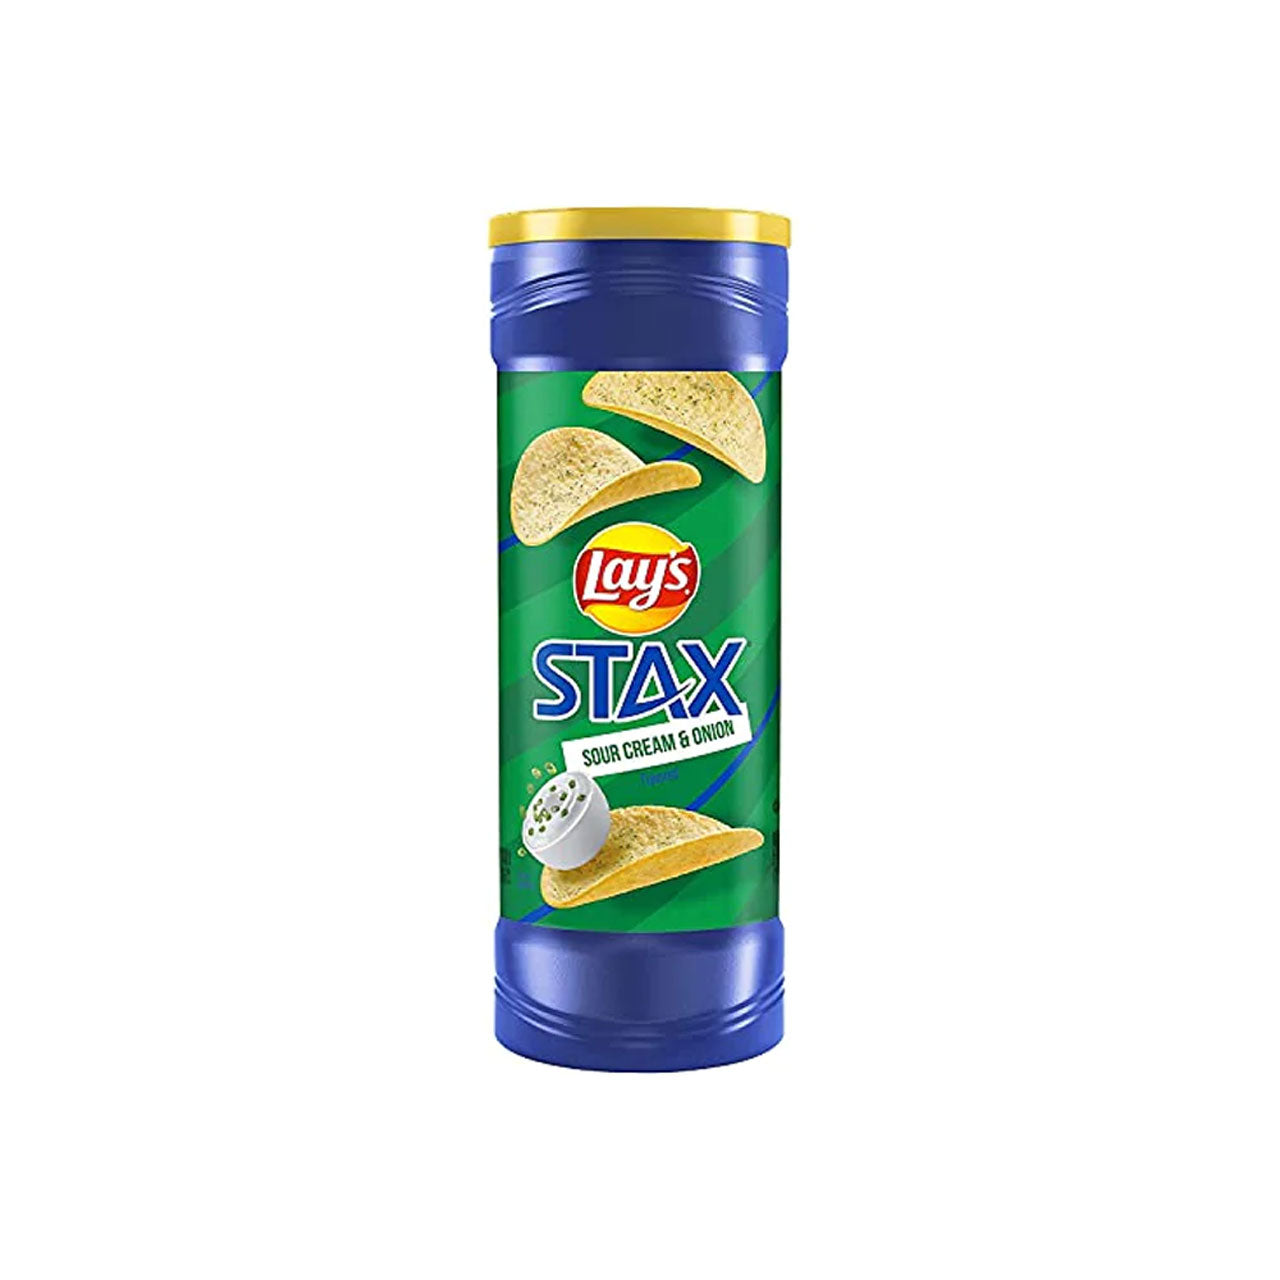 Lays Stax - Sour Cream and Onion